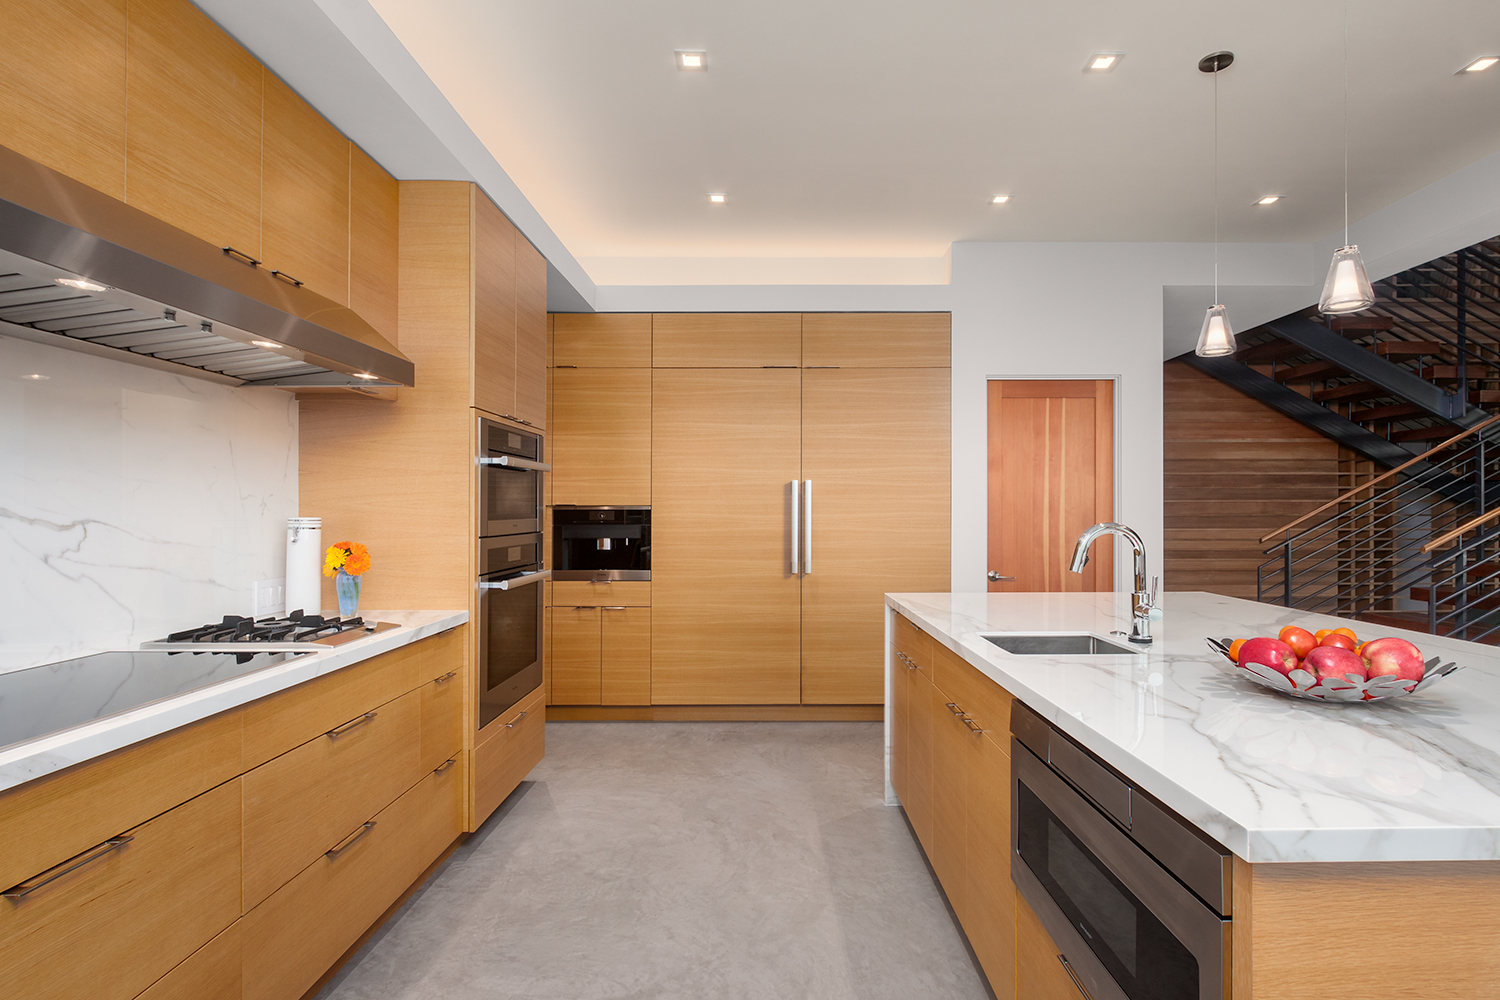 contemporary kitchen with marble countertops and wood cupboards and a bowl of red apples on the counter